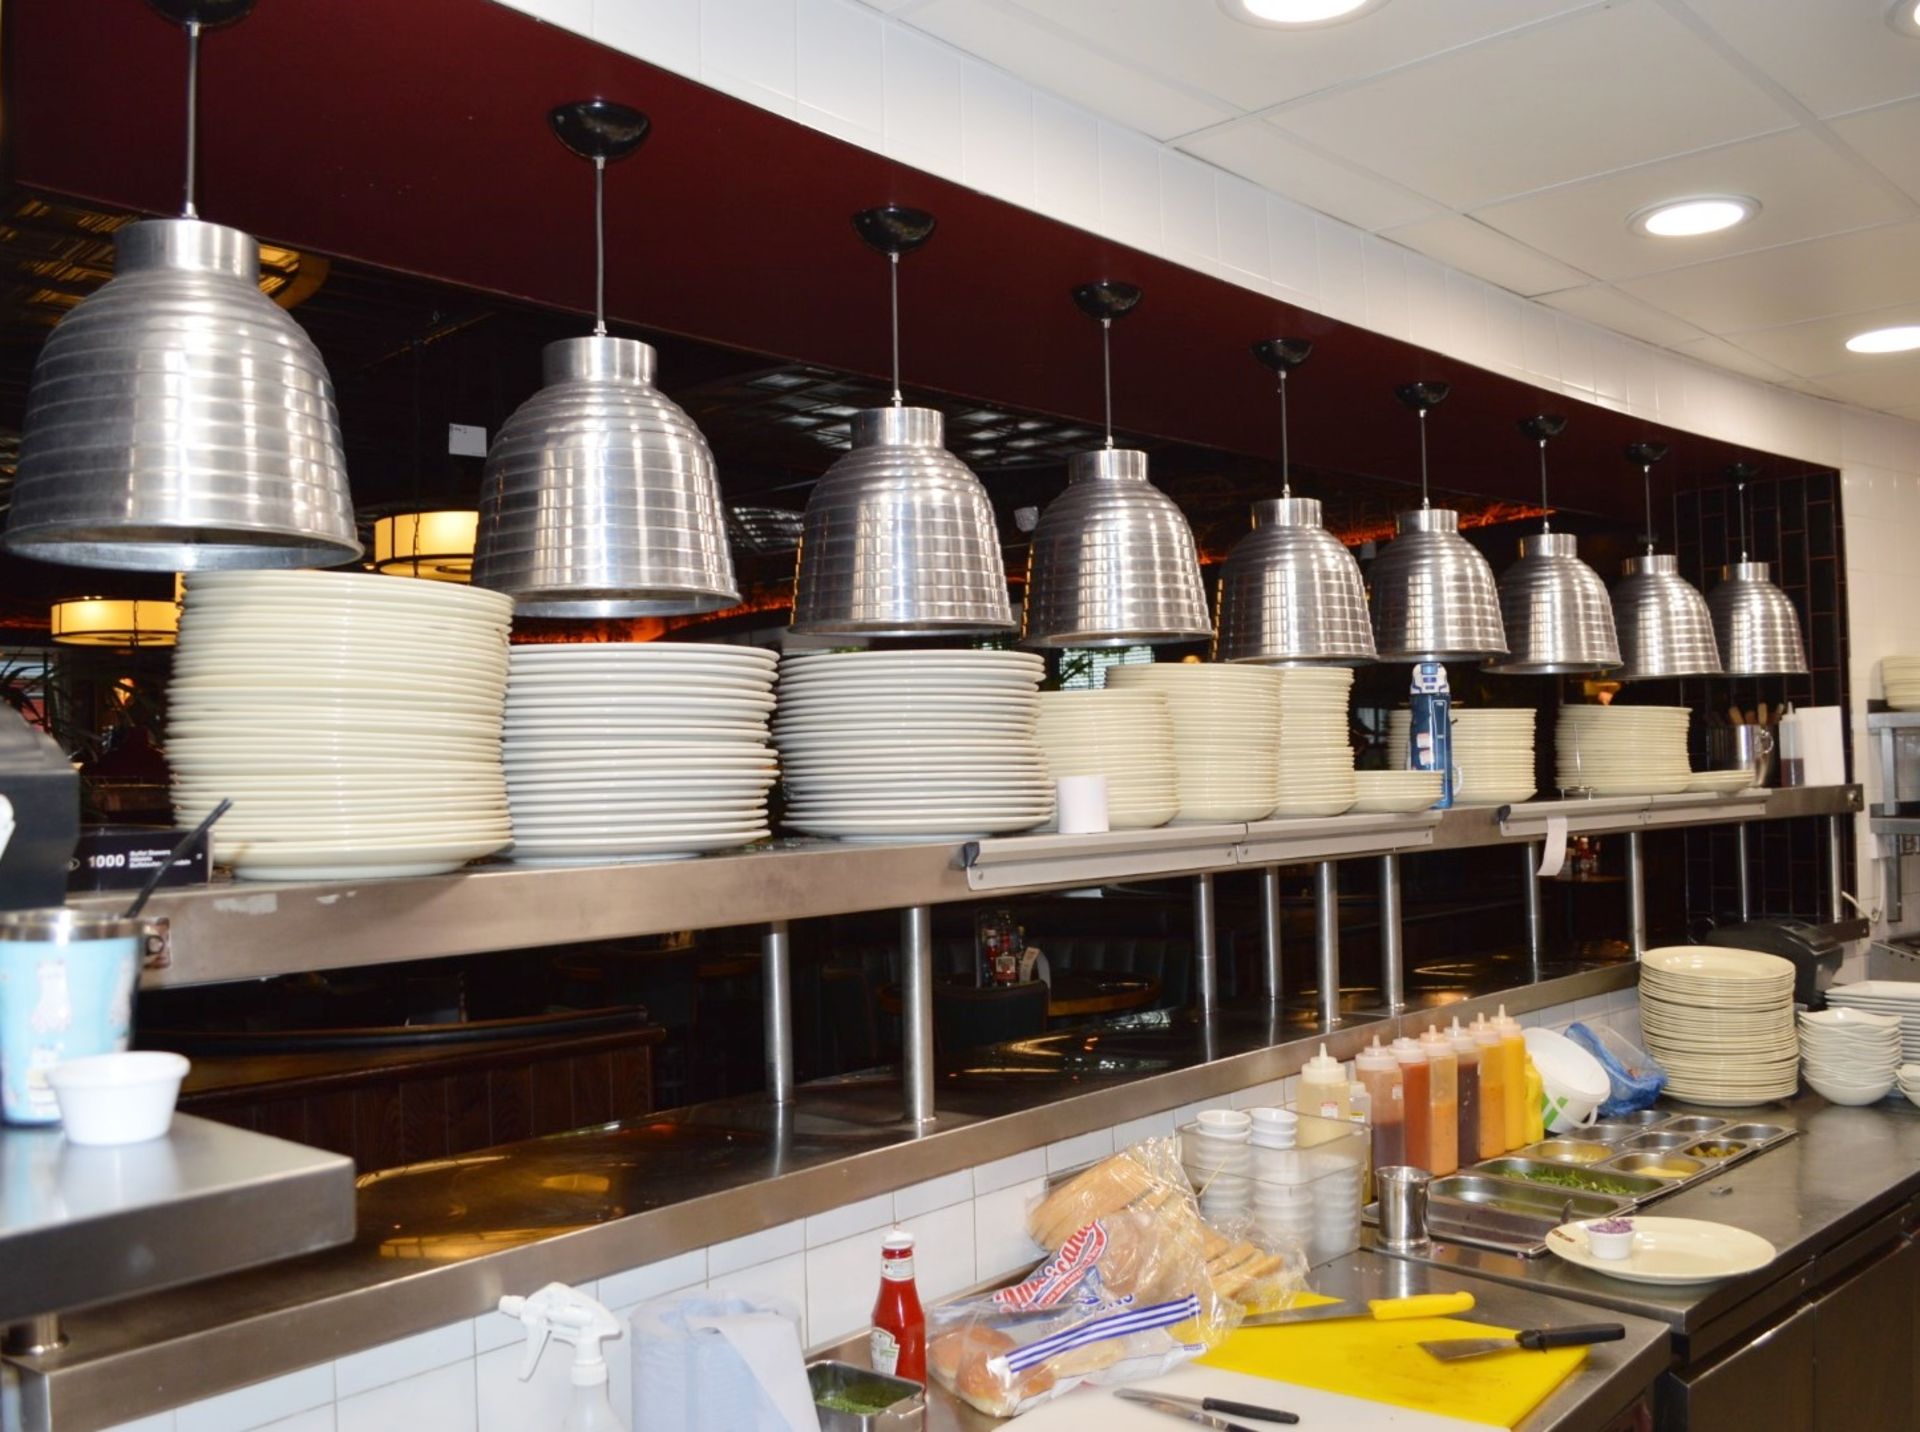 9 x Suspended Food Warming Lamps With Ribbed Chrome Design - CL390 - Location: Altrincham WA14 This